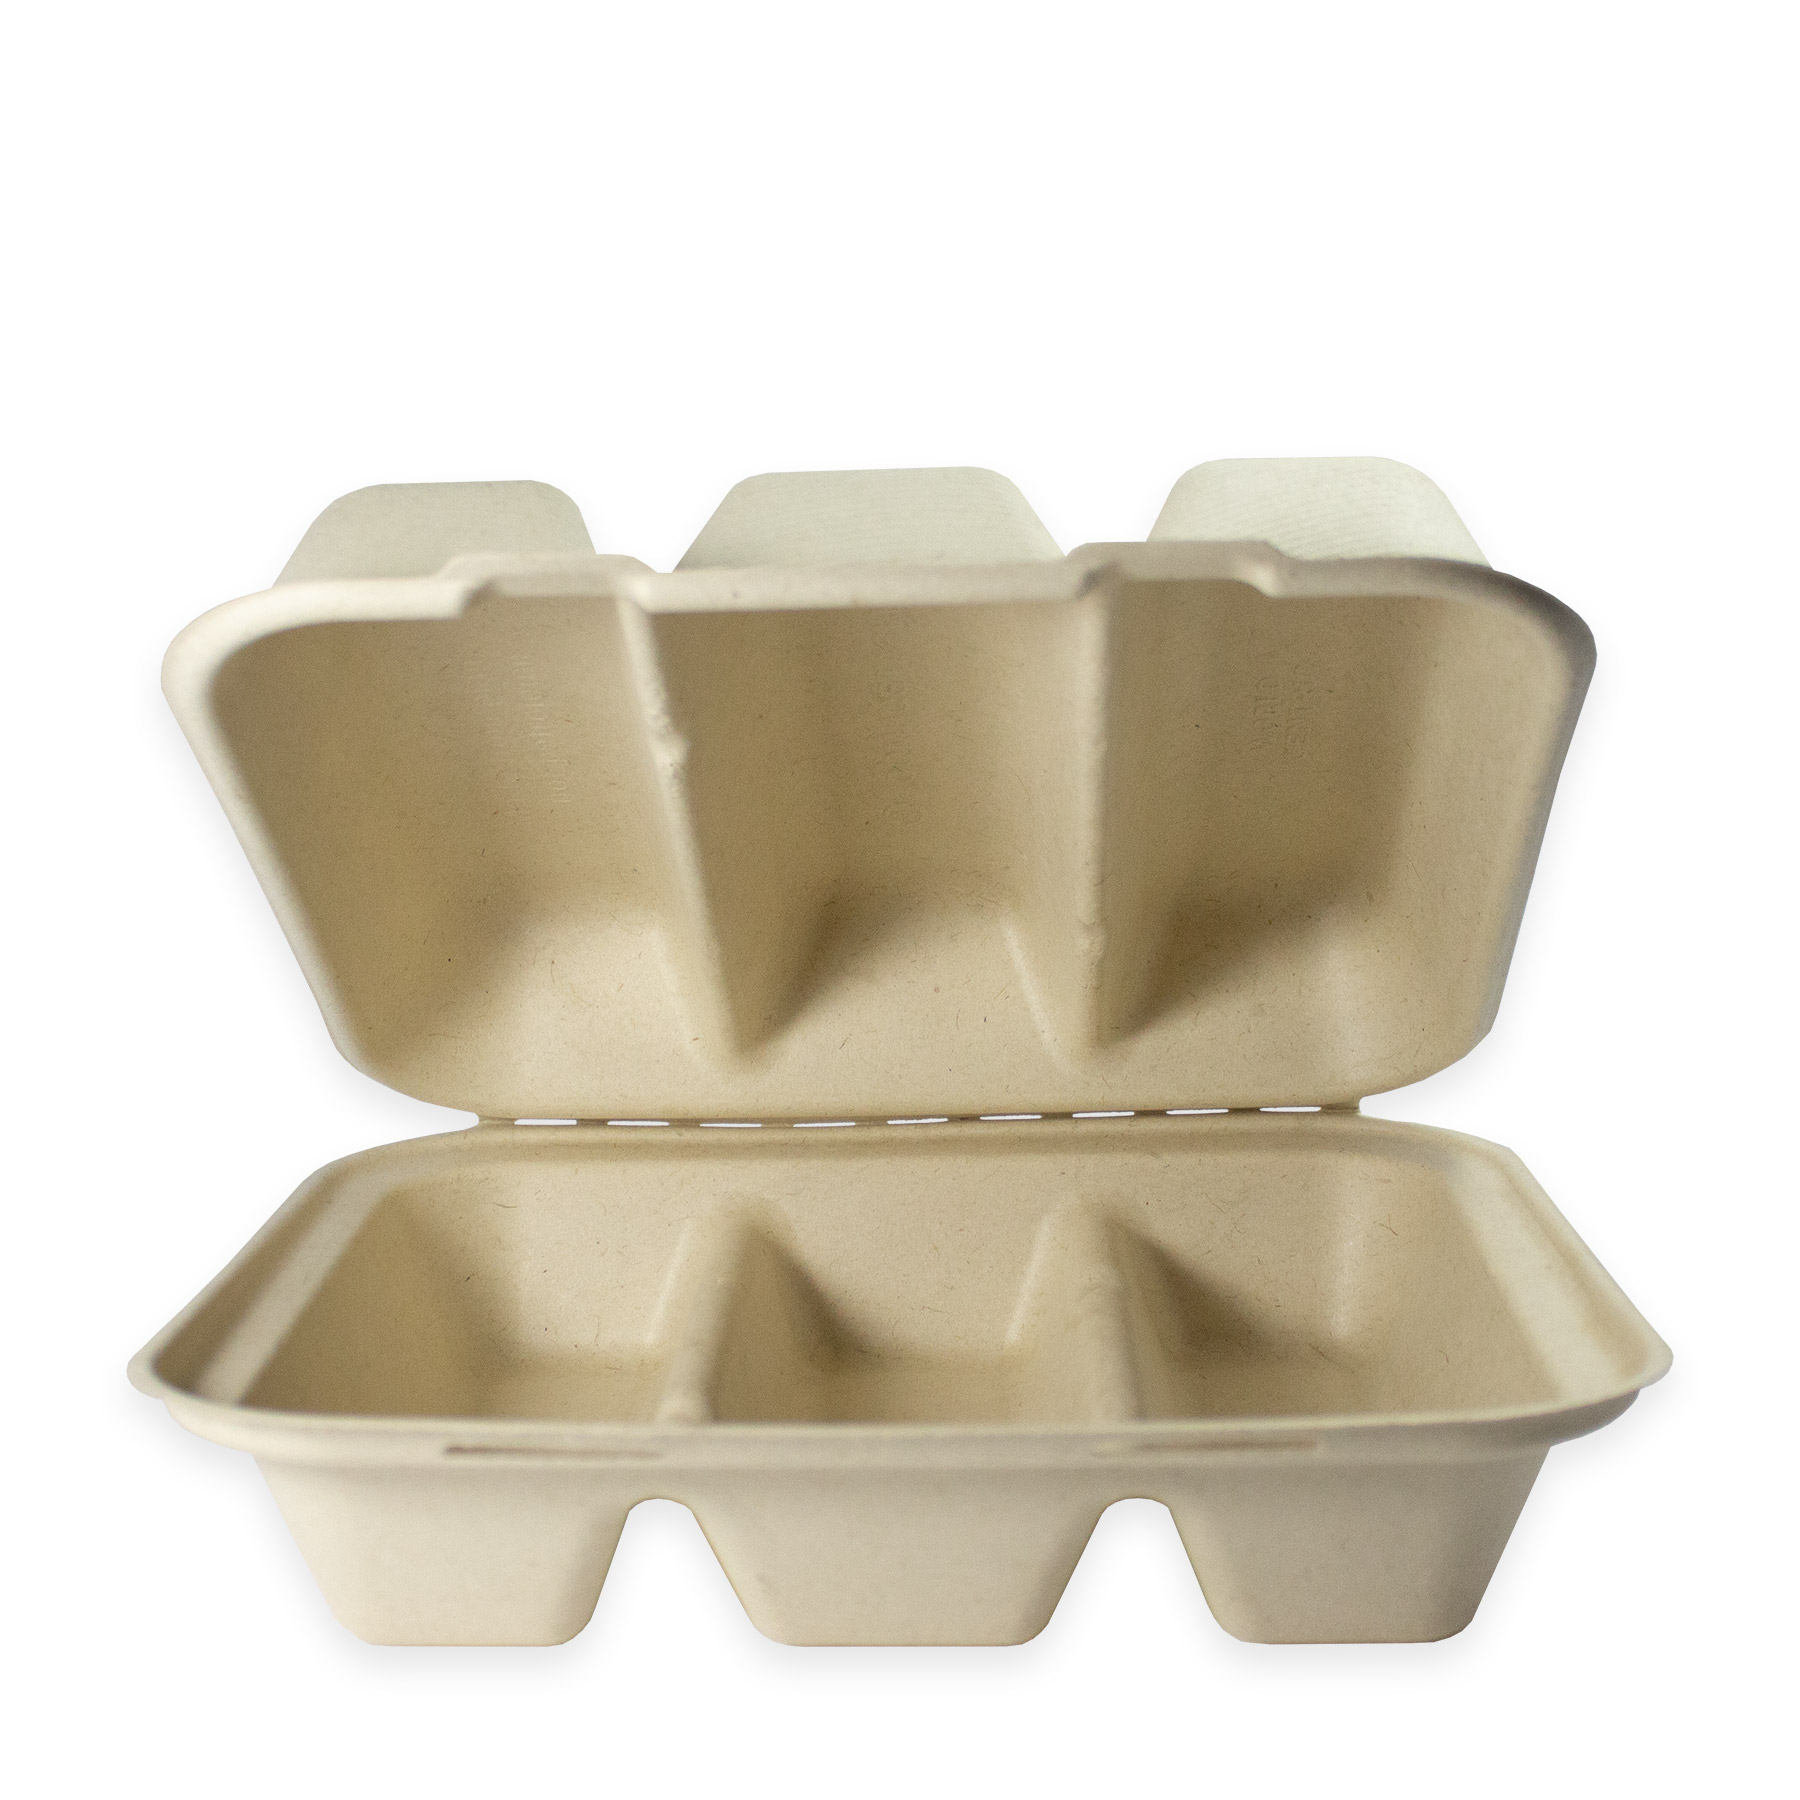 Fiber Clamshell Containers 8 x 8 x 3